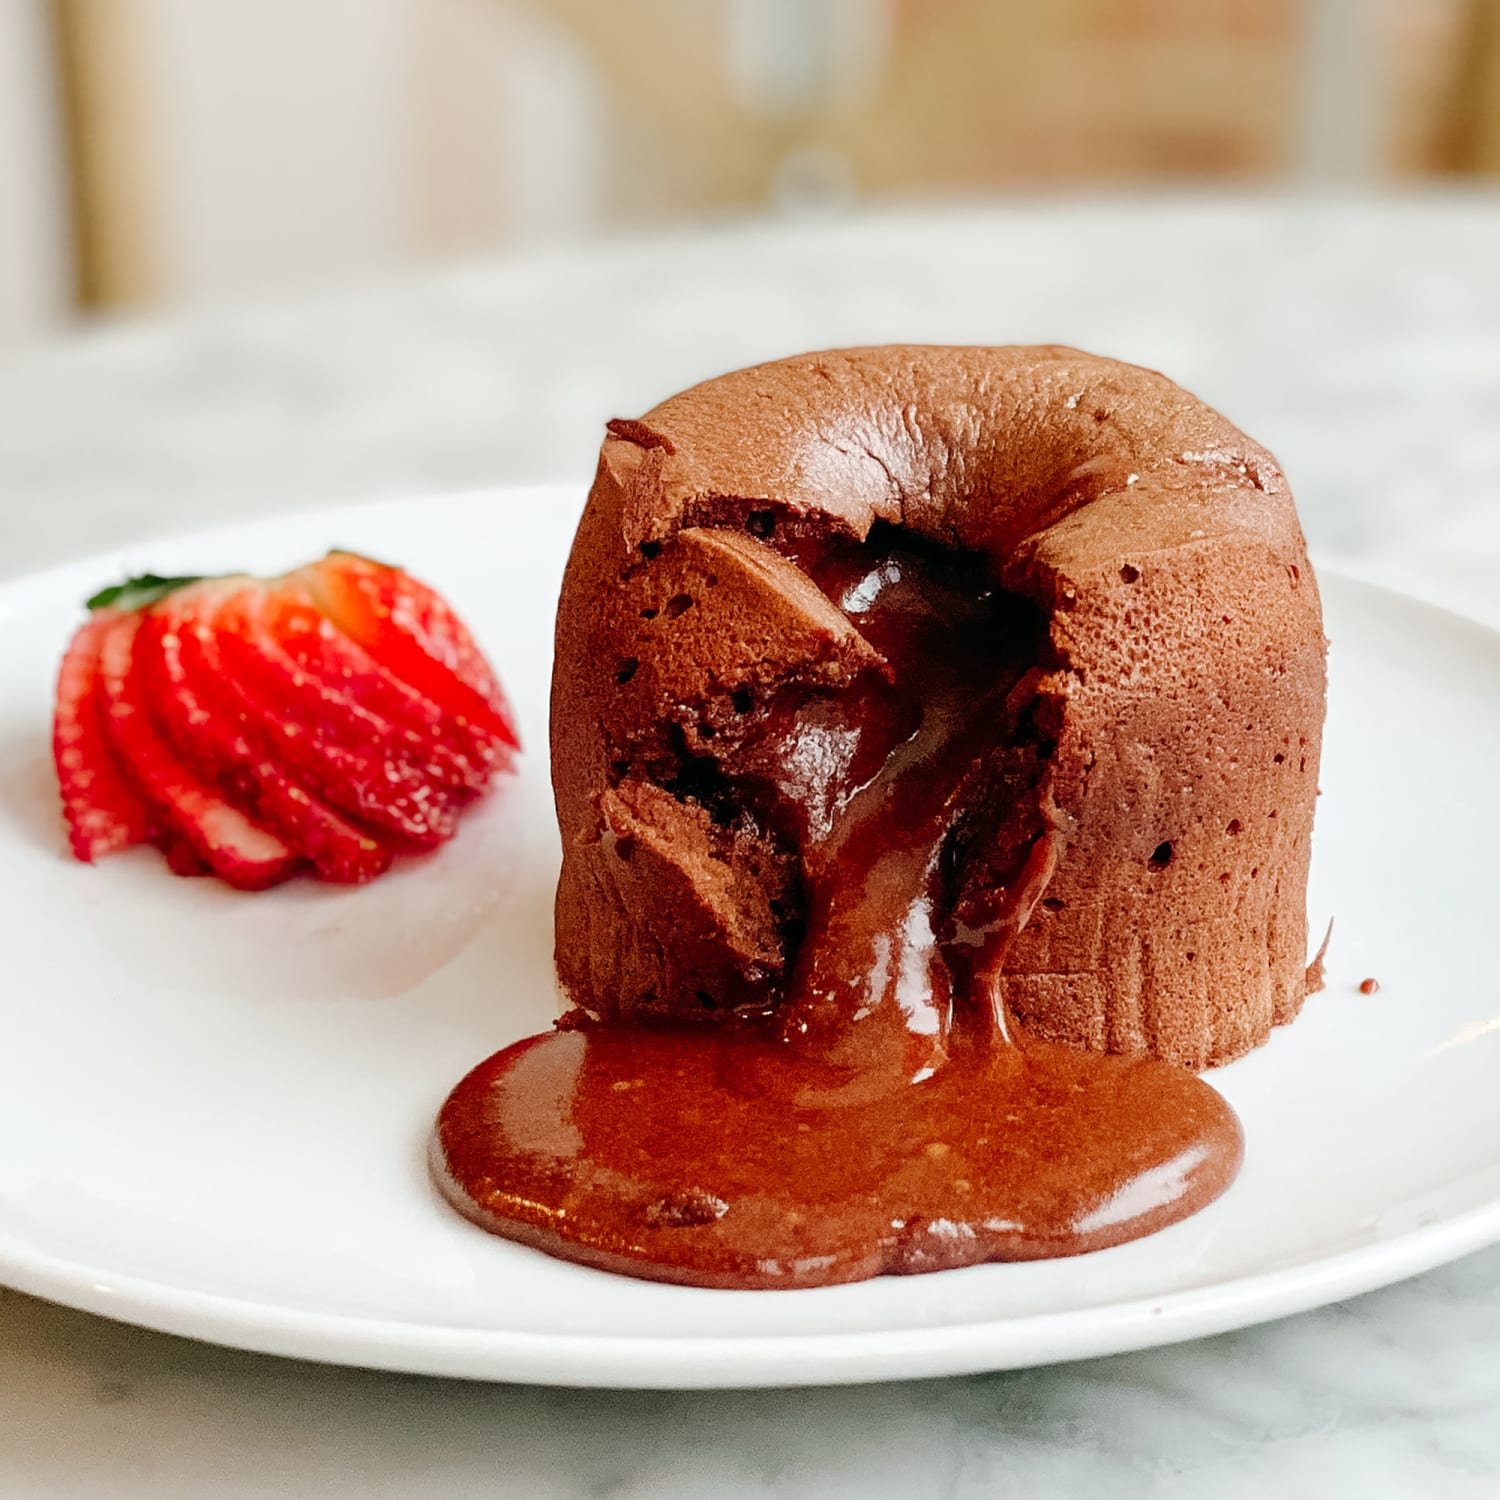 Super Easy Chocolate Molten Cakes (With Video!) - The Flavor Bender